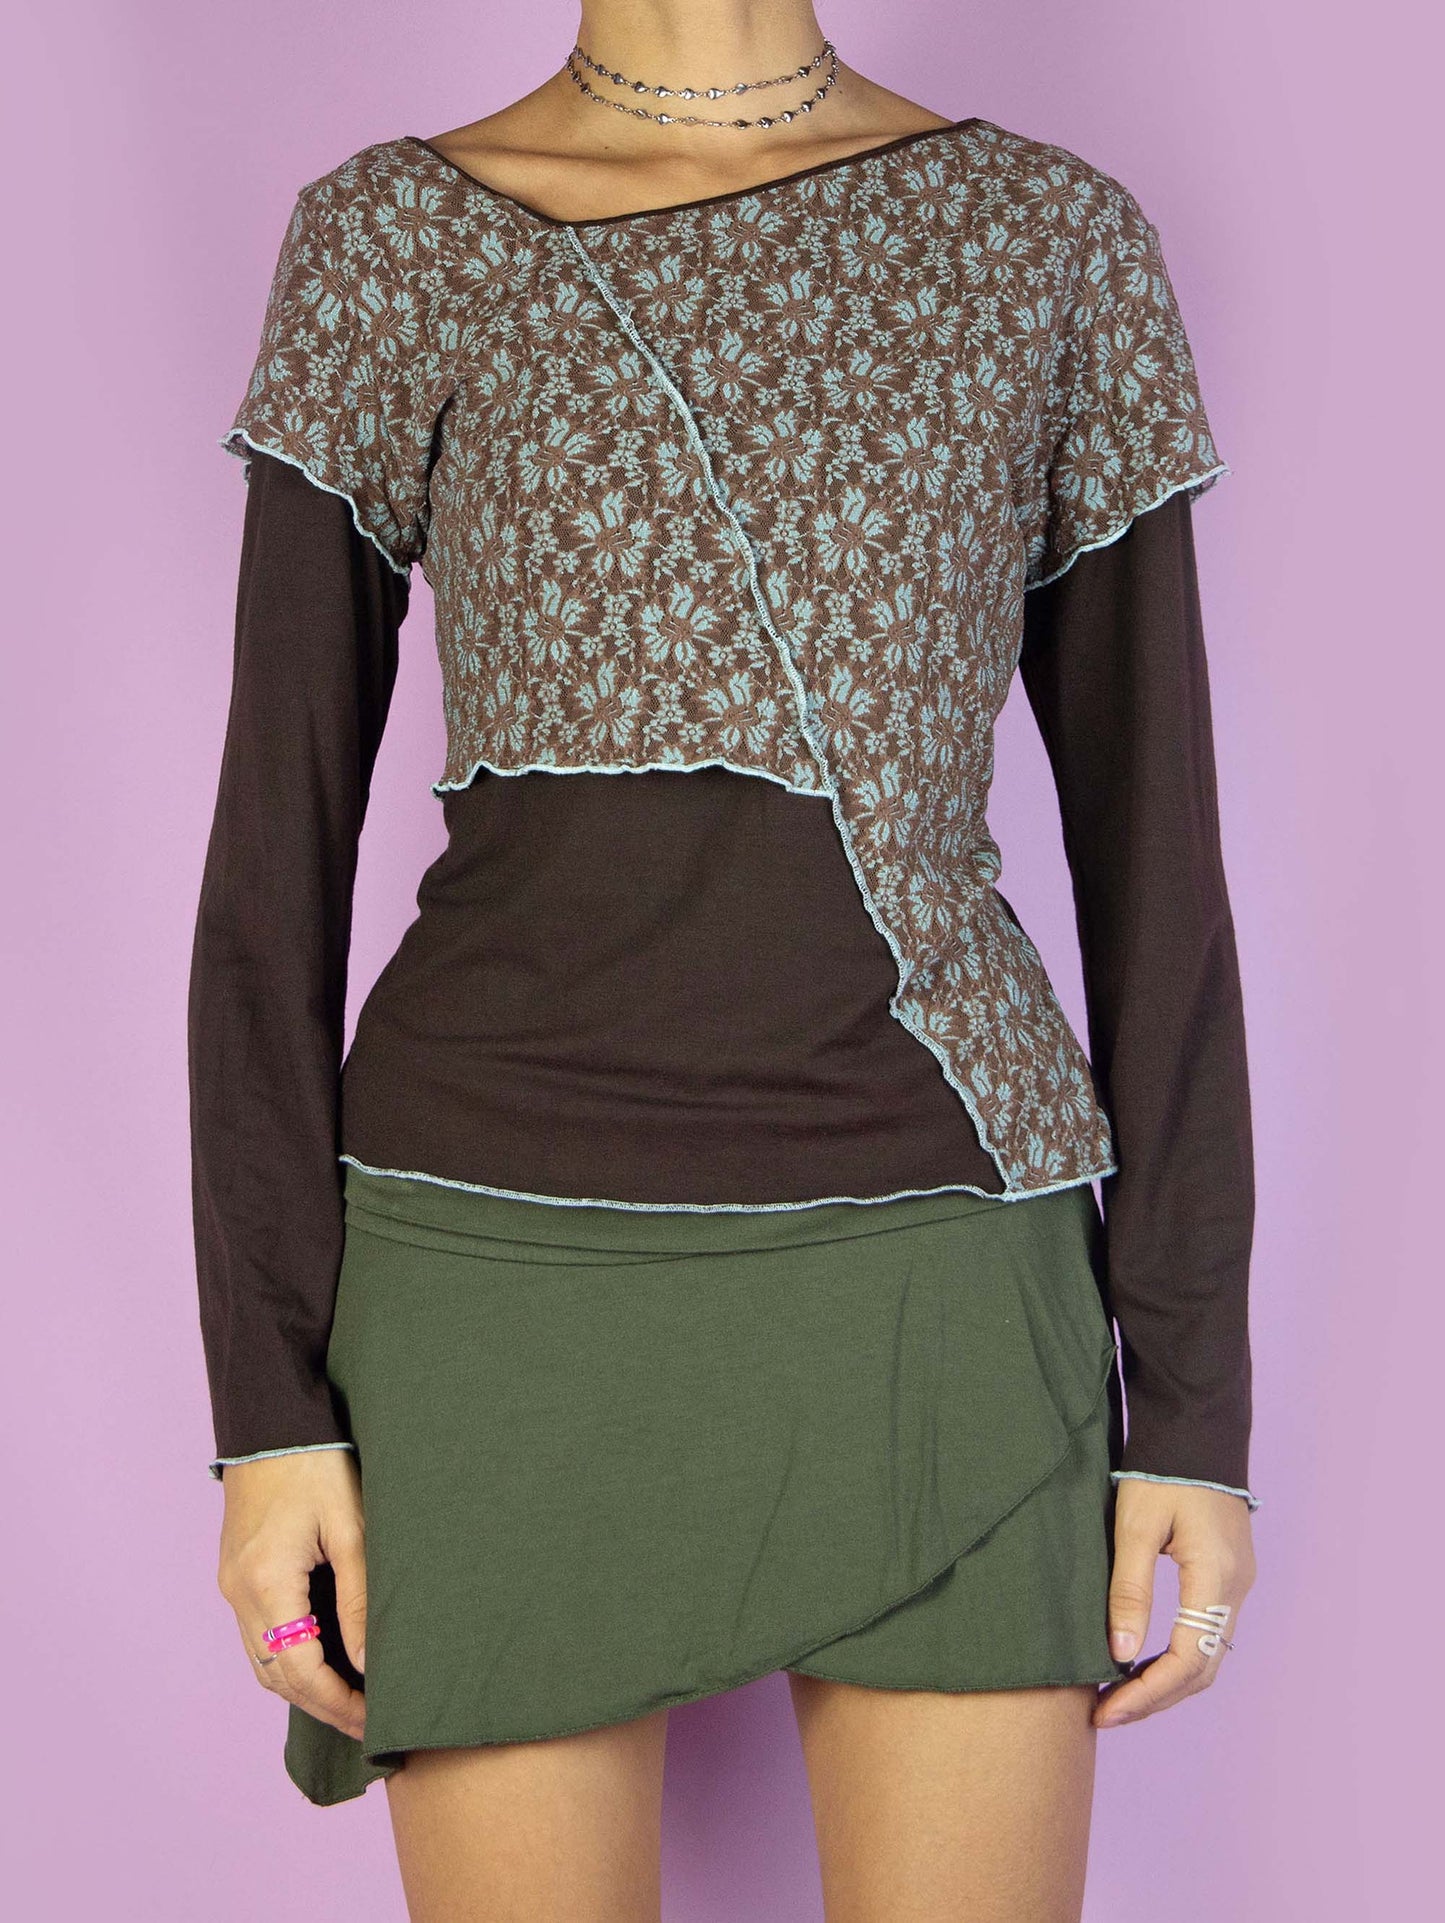 The Y2K Fairy Grunge Brown Top is a vintage dark brown long-sleeved shirt with asymmetric lace details in blue and brown. Super cute 2000s subversive top.